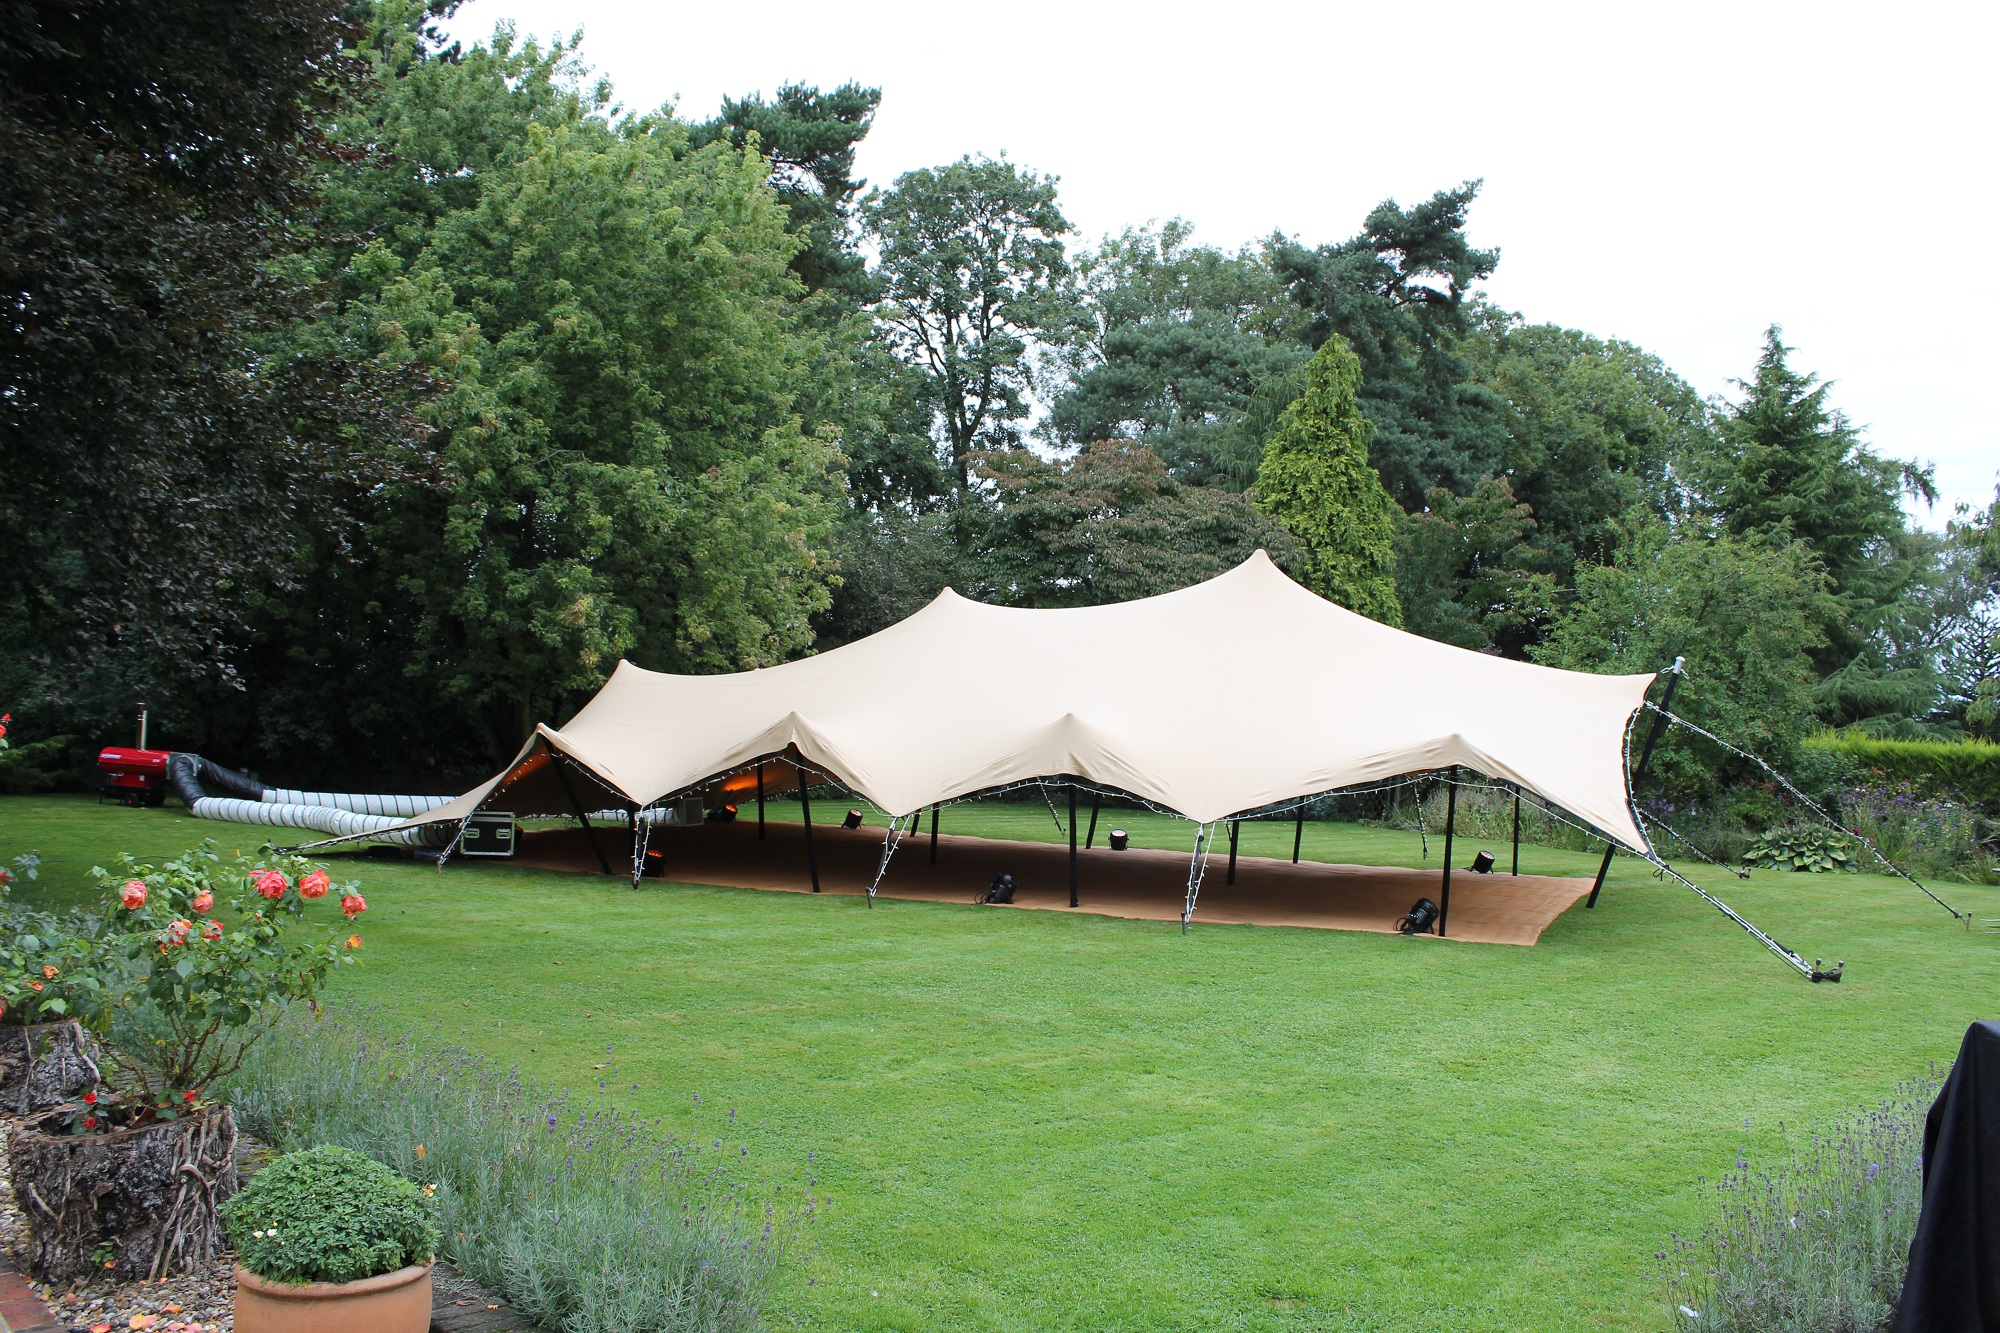 Stretch tents for sale in south africa we offer the best quality stretch tents at the lowest prices 